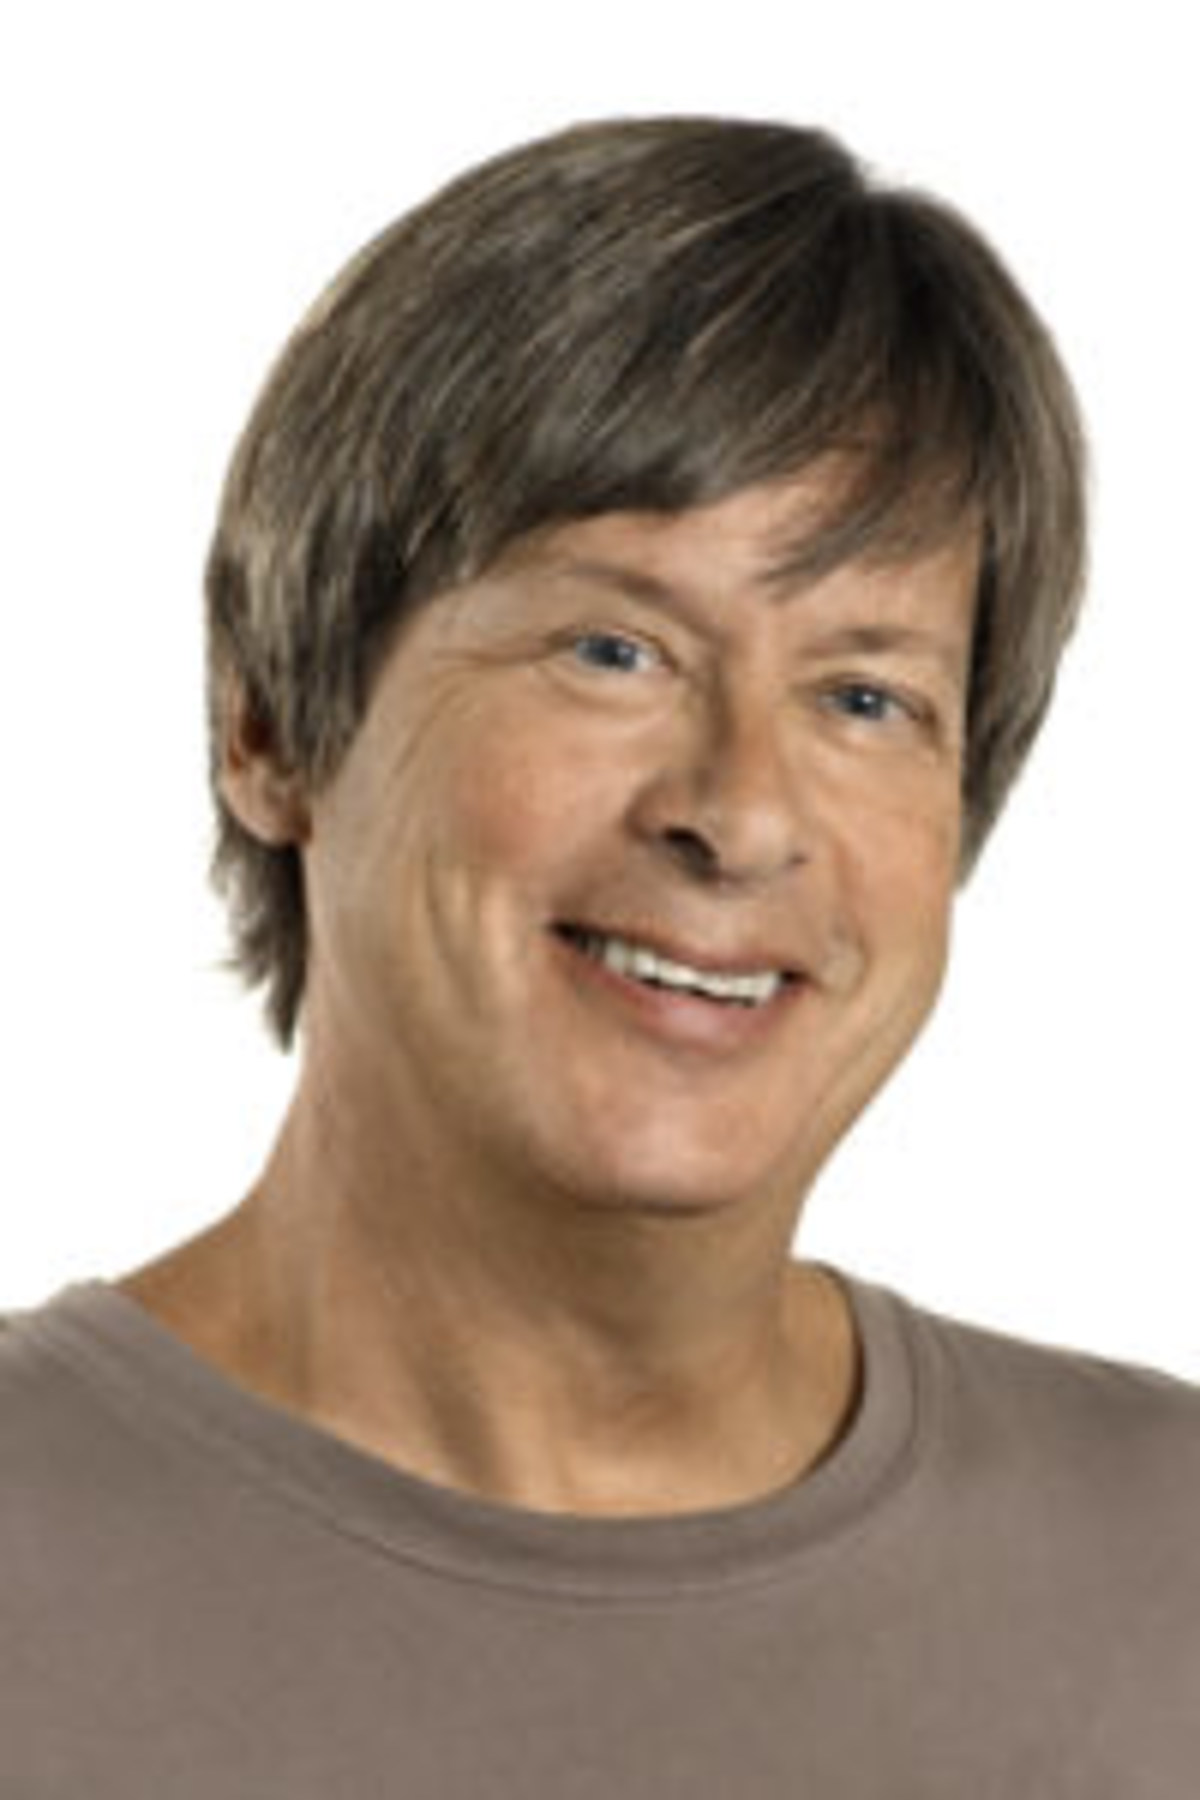 Make Your Reservations Now To LOL With Dave Barry